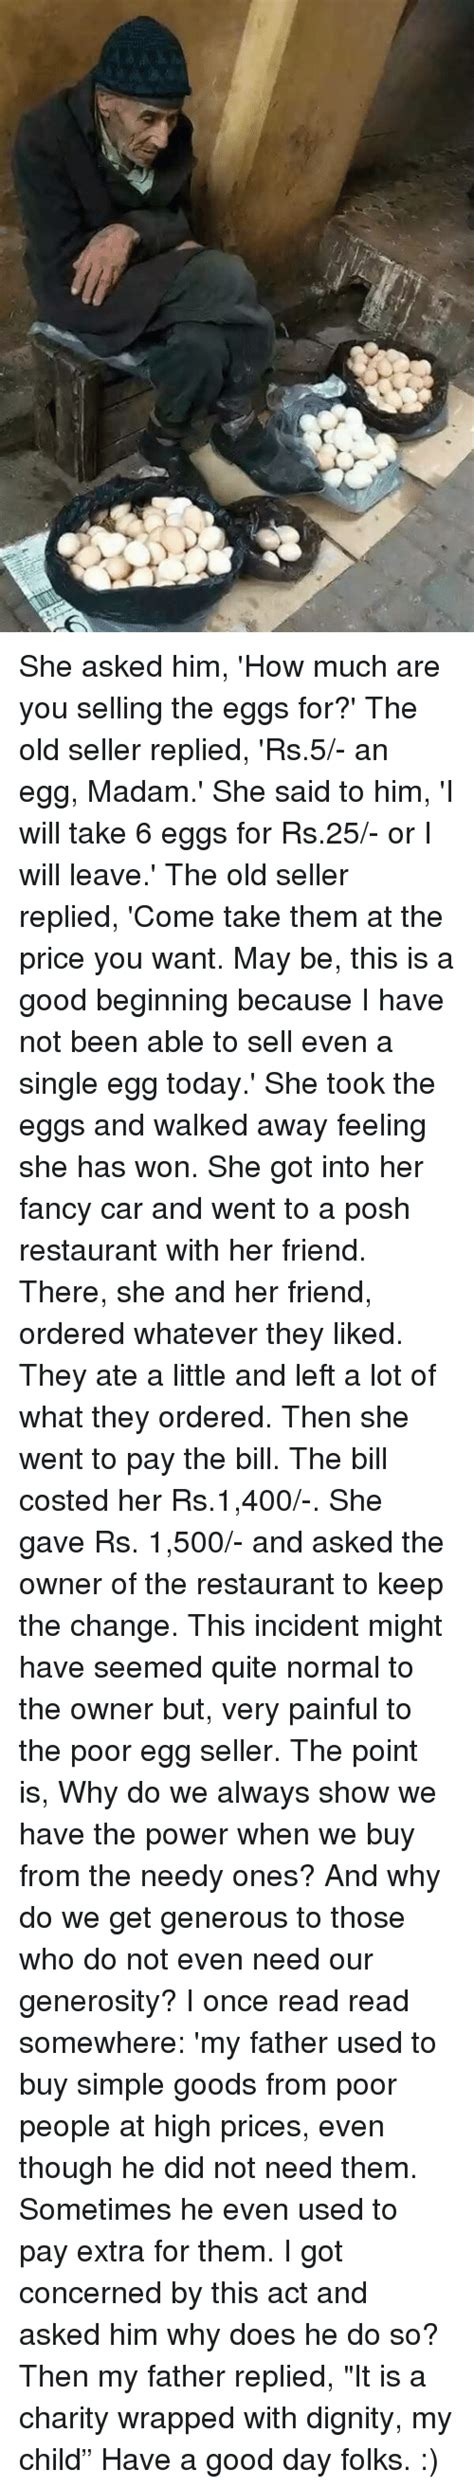 Only then did they share the bad news. She Asked Him 'How Much Are You Selling the Eggs For?' the ...